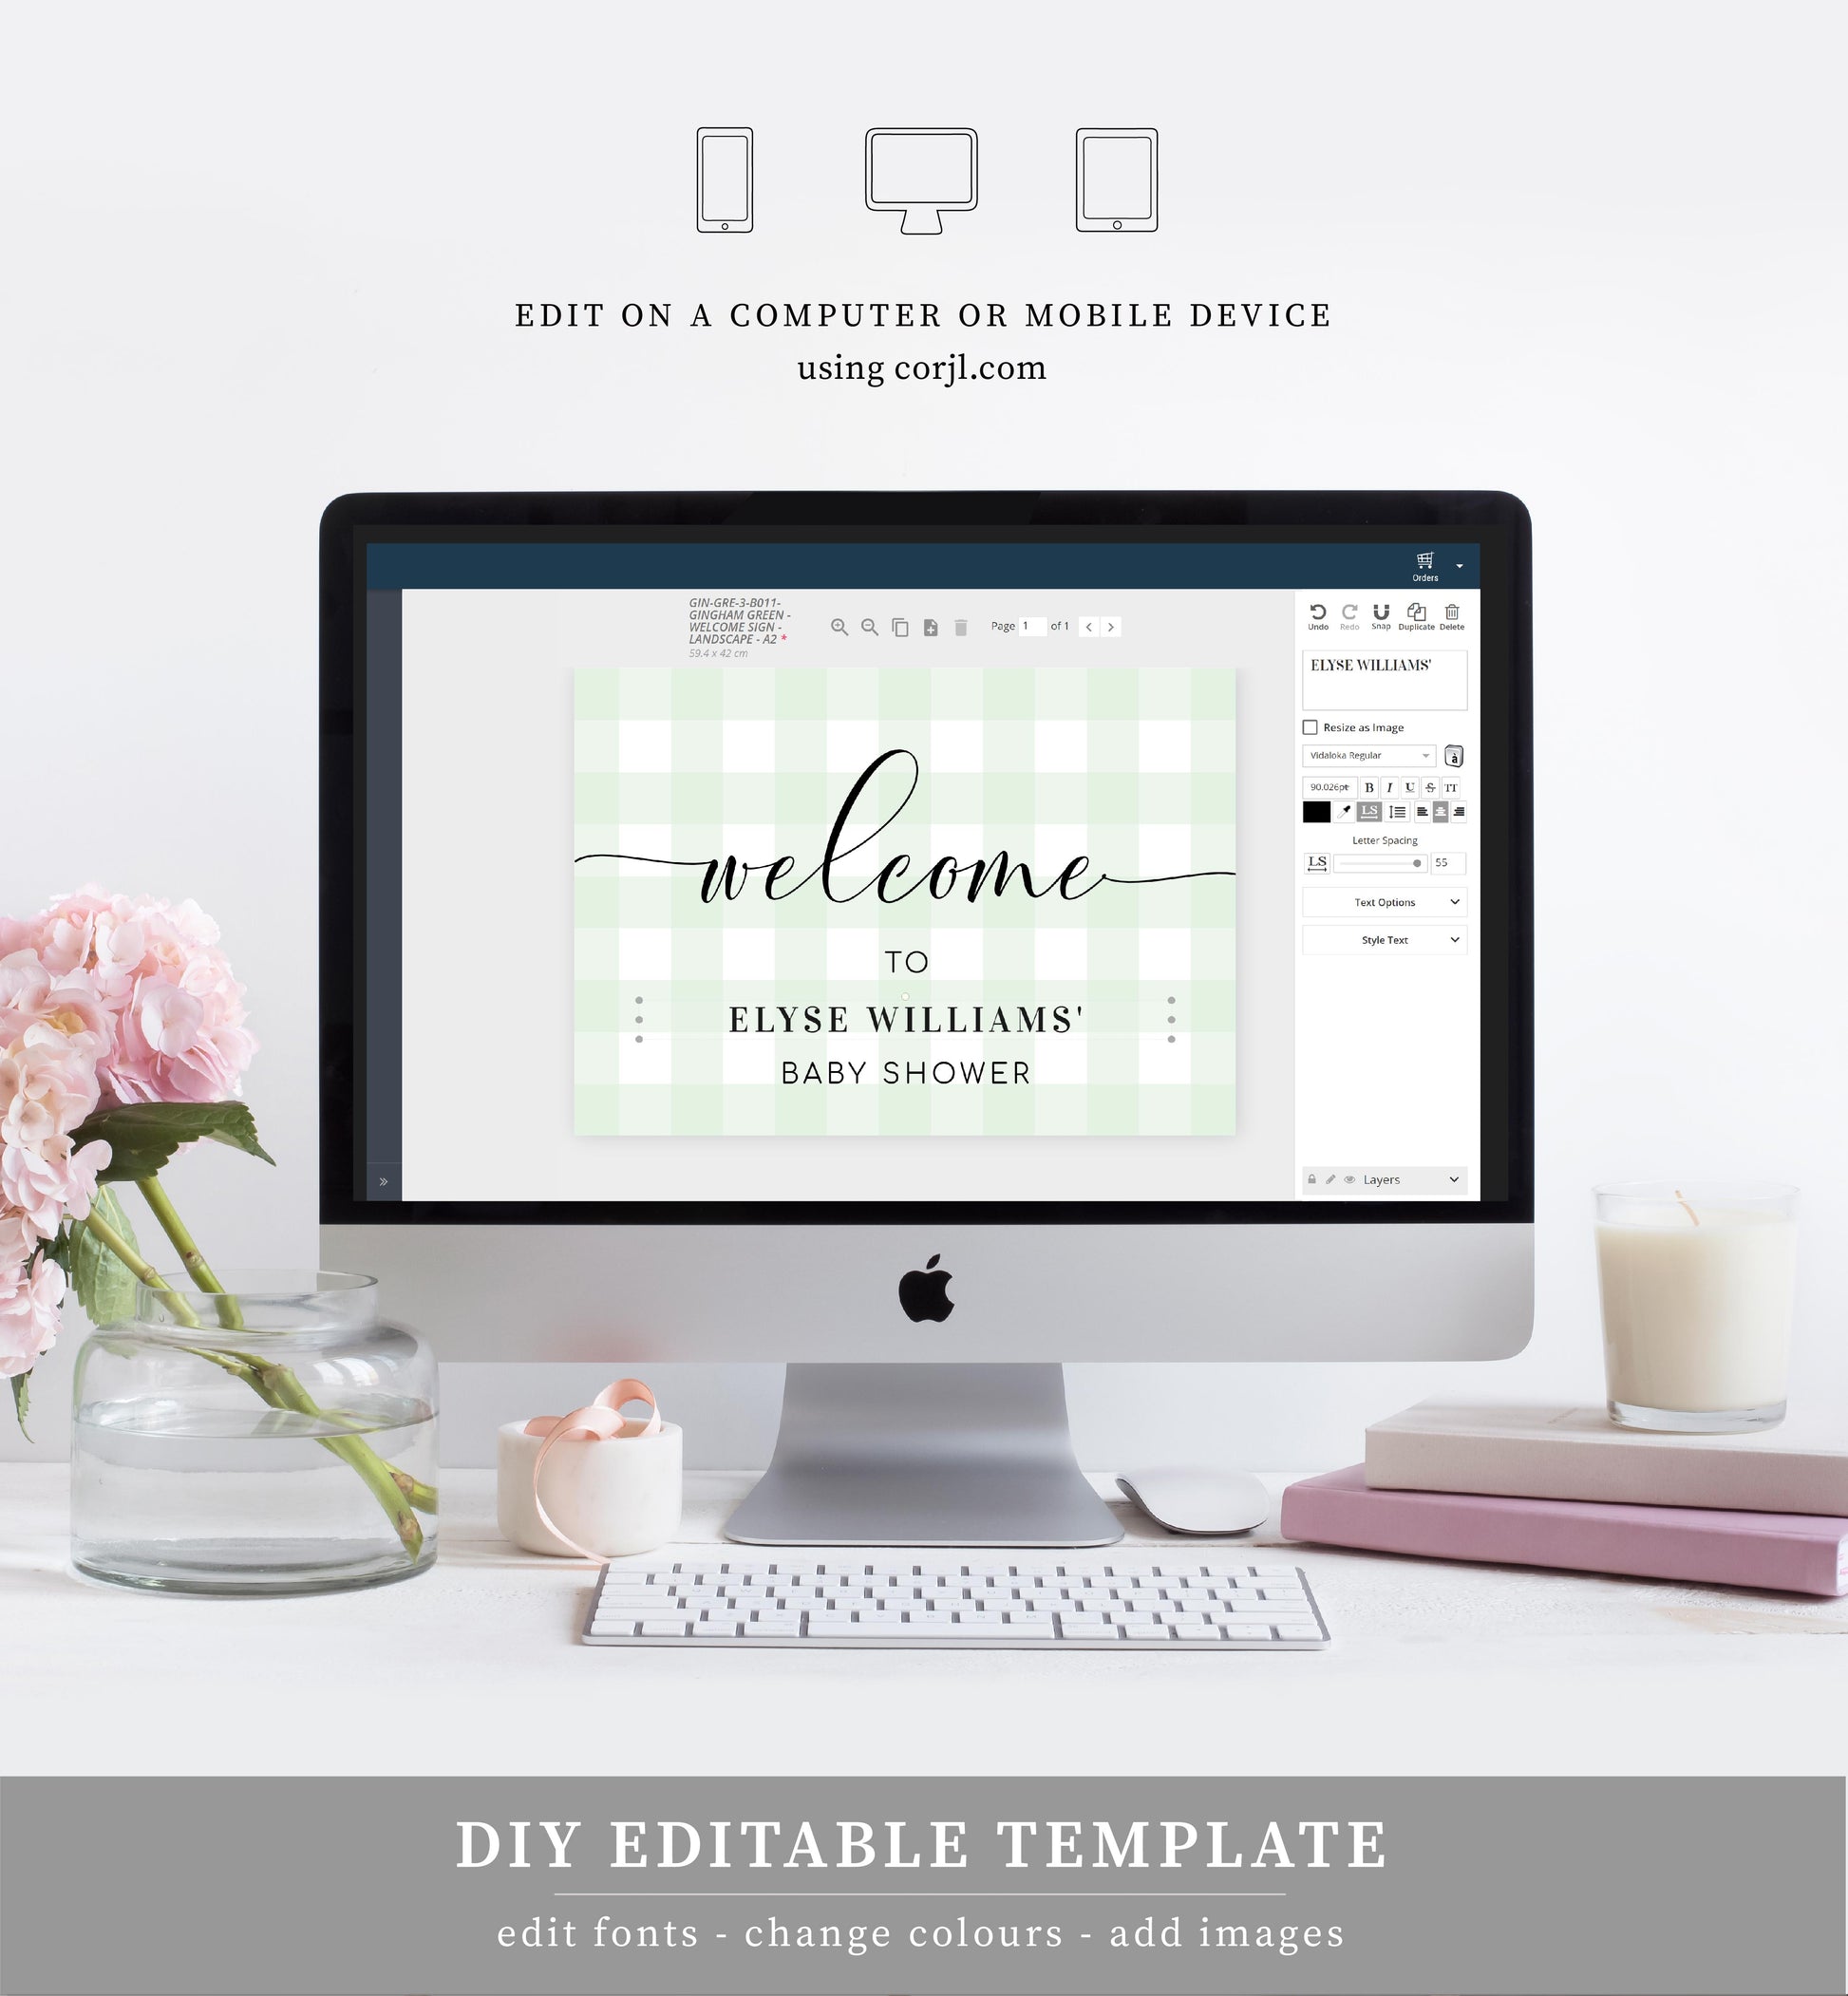 Gingham Mint Green | Printable Welcome Sign - Black Bow Studio